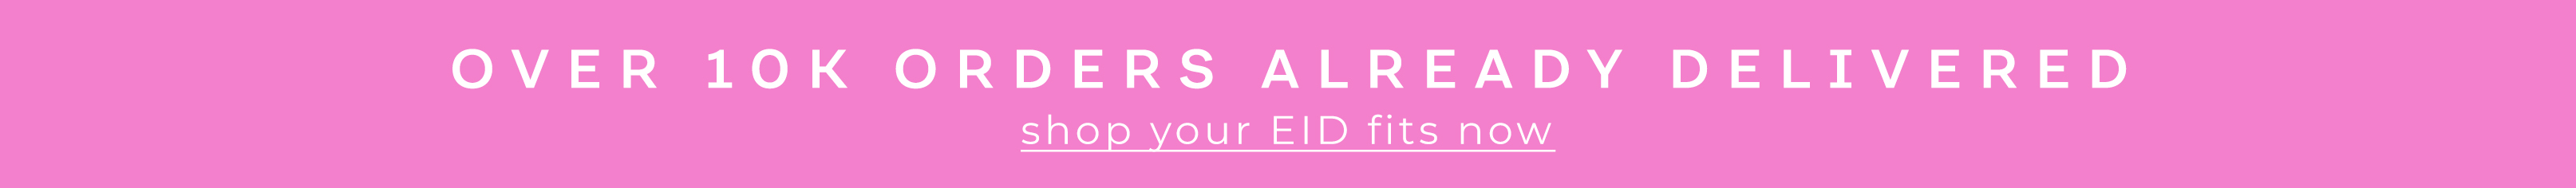 New Arrivals in Eid Suits, Saree, Lehenga and More - Asian Clothing in UK